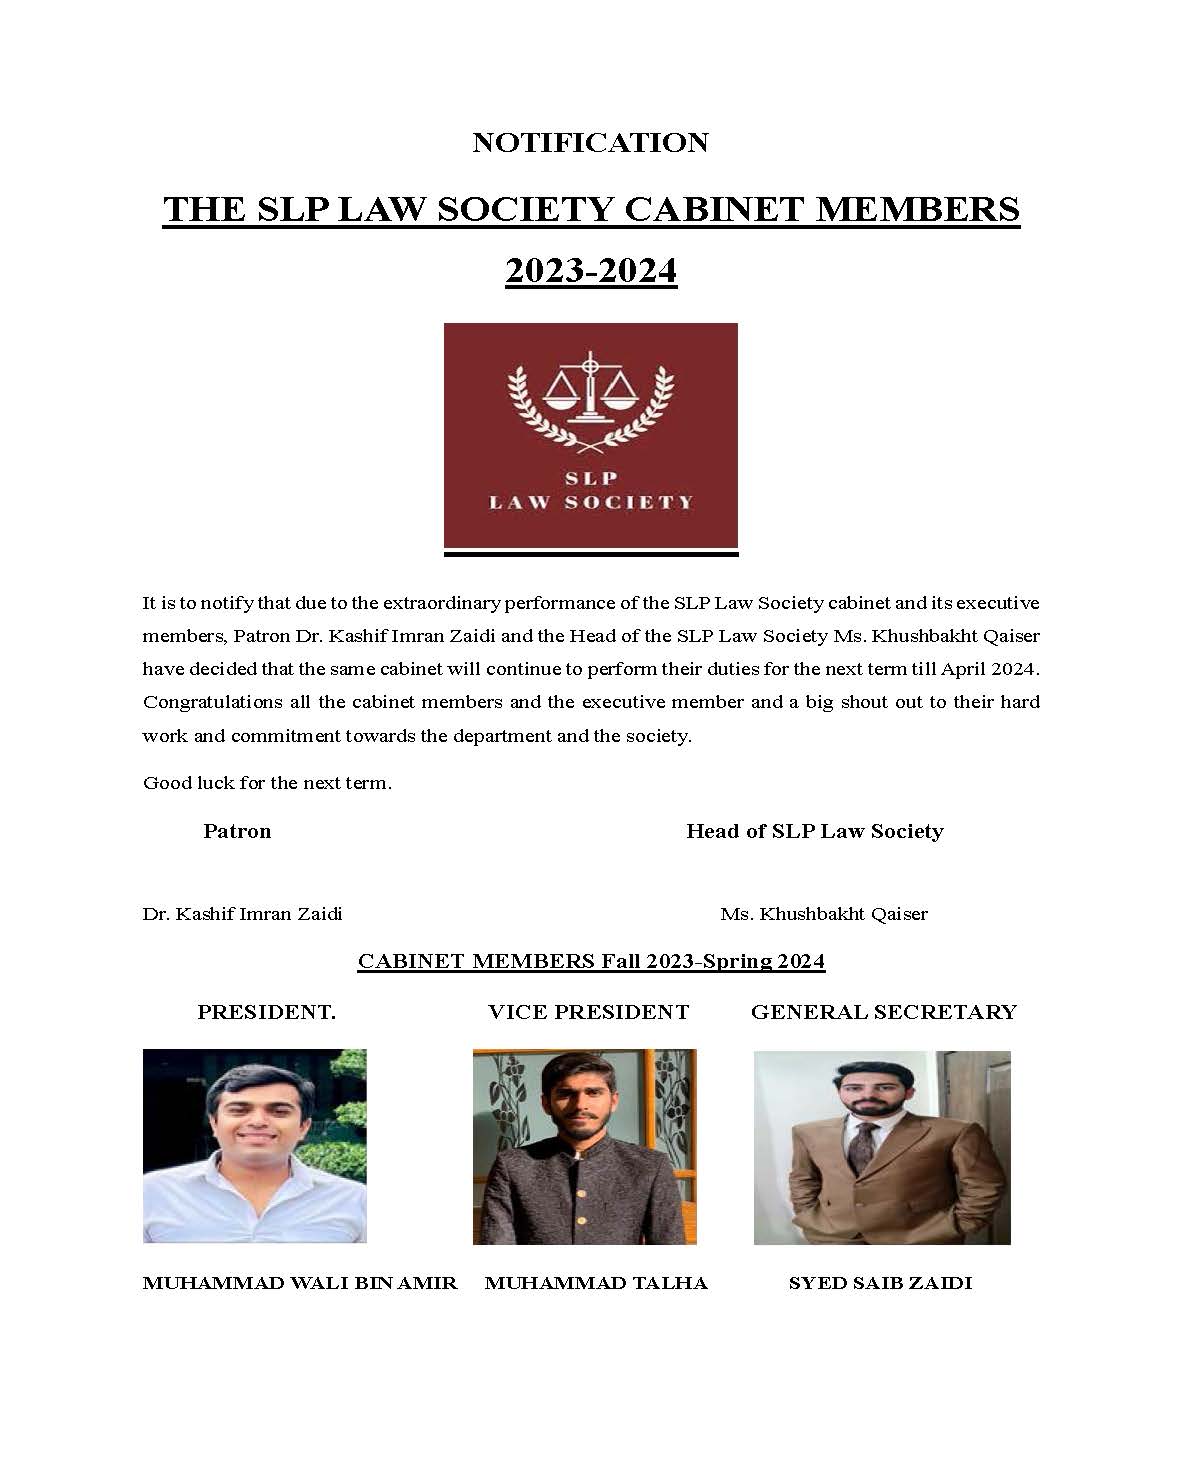 THE SLP LAW SOCIETY CABINET MEMBERS